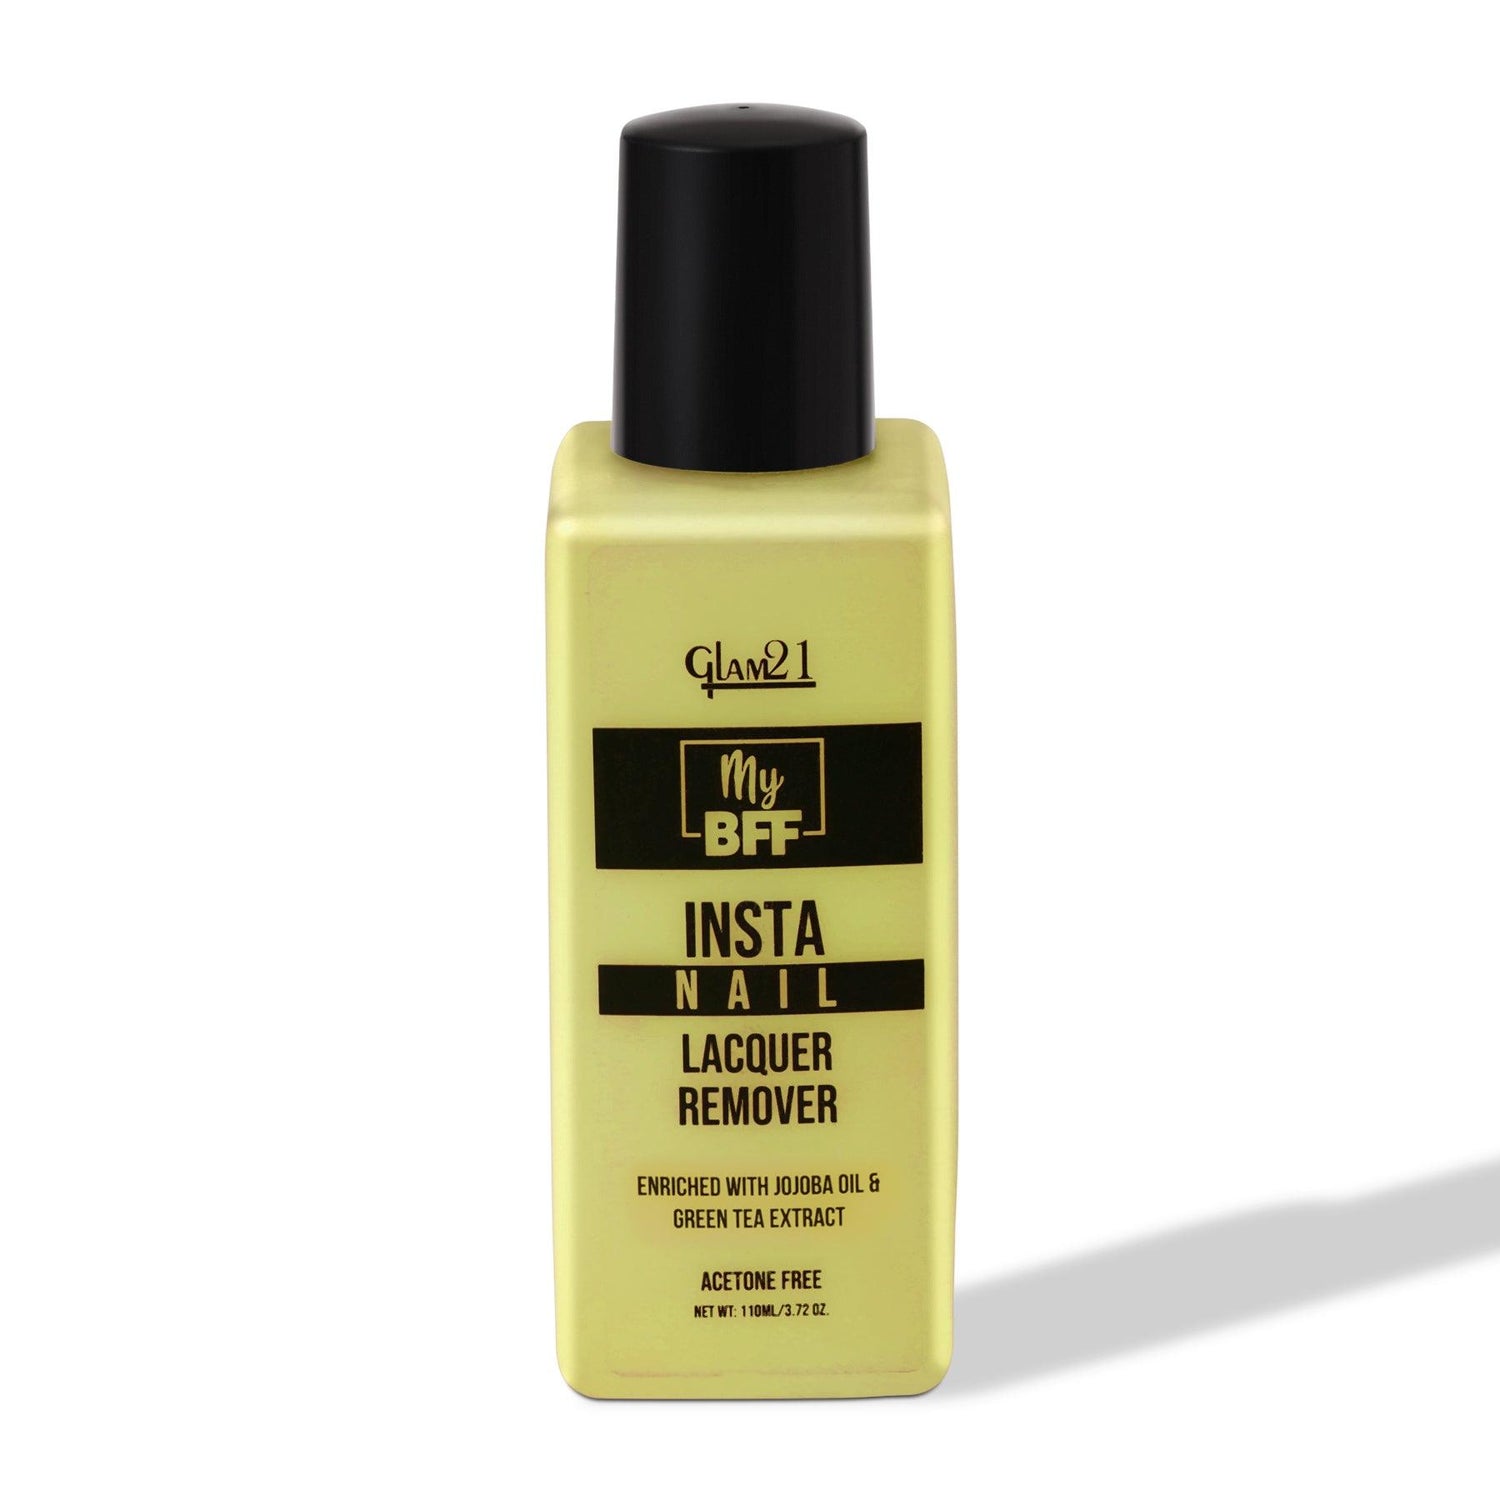 My BFF Insta Nail Lacquer Remover